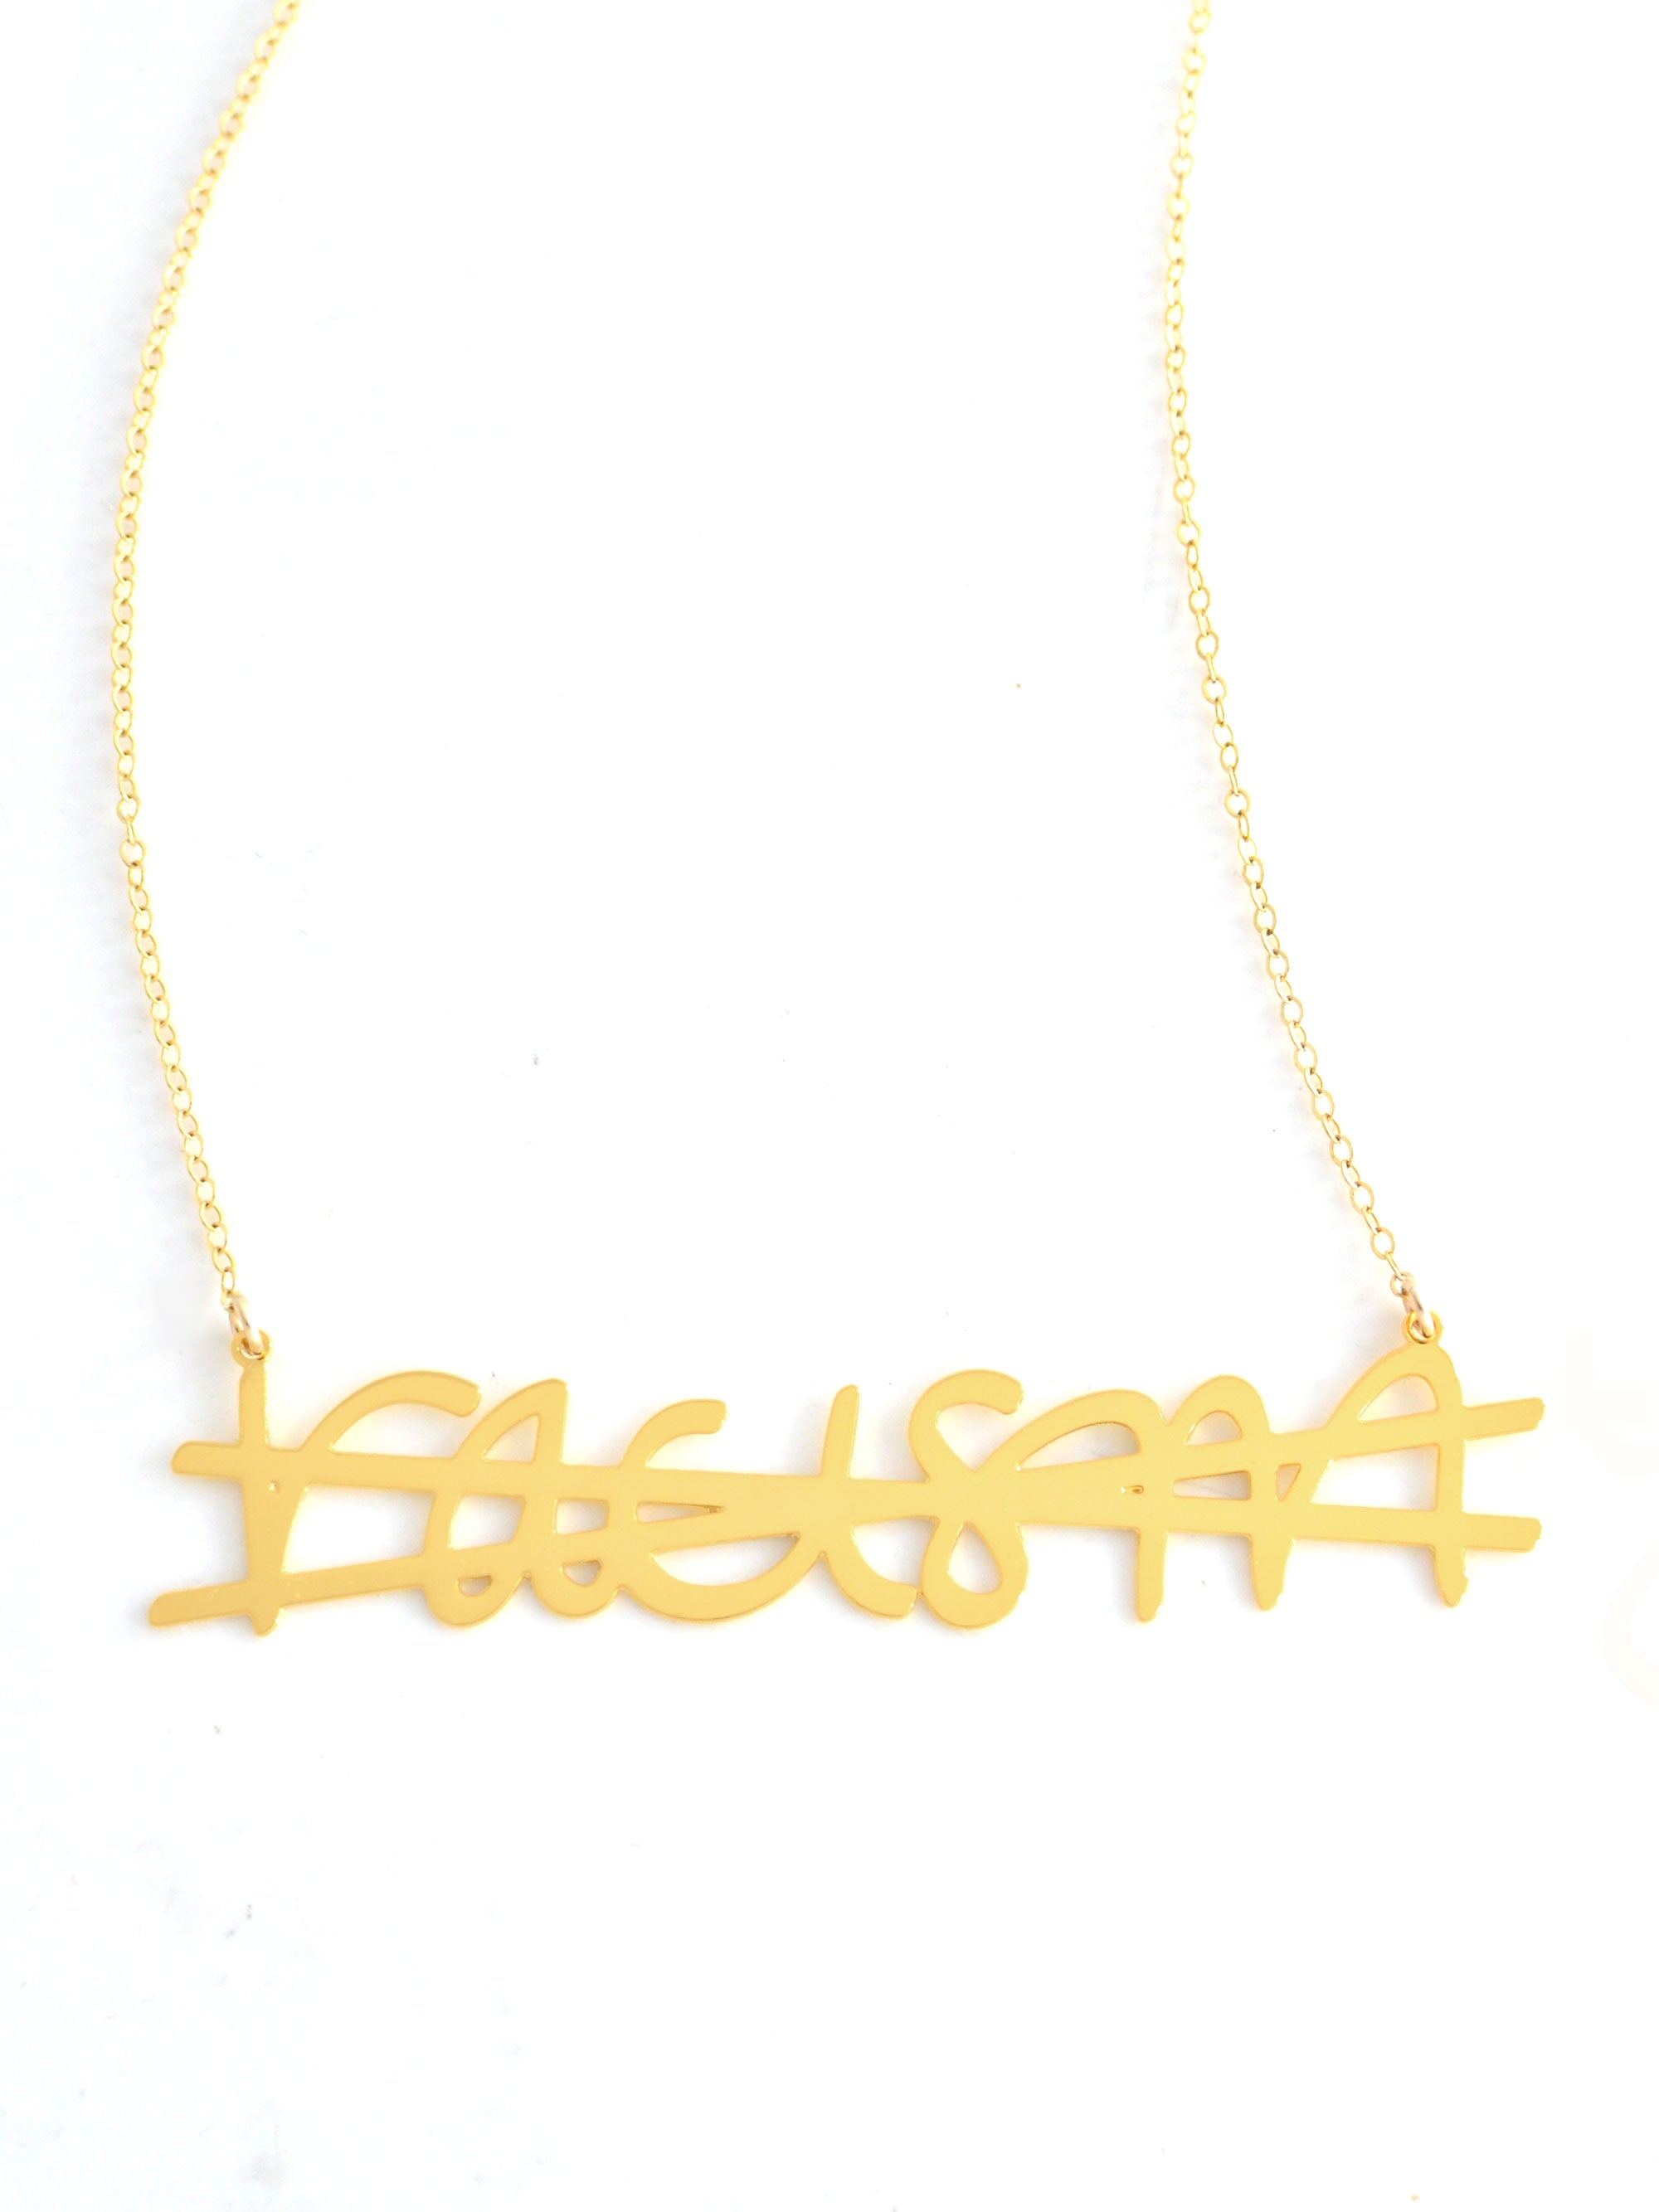 No More Racism Necklace - High Quality, Affordable, Hand Written, Empowering, Self Love, Mantra Word Necklace - Available in Gold and Silver - Small and Large Sizes - Made in USA - Brevity Jewelry